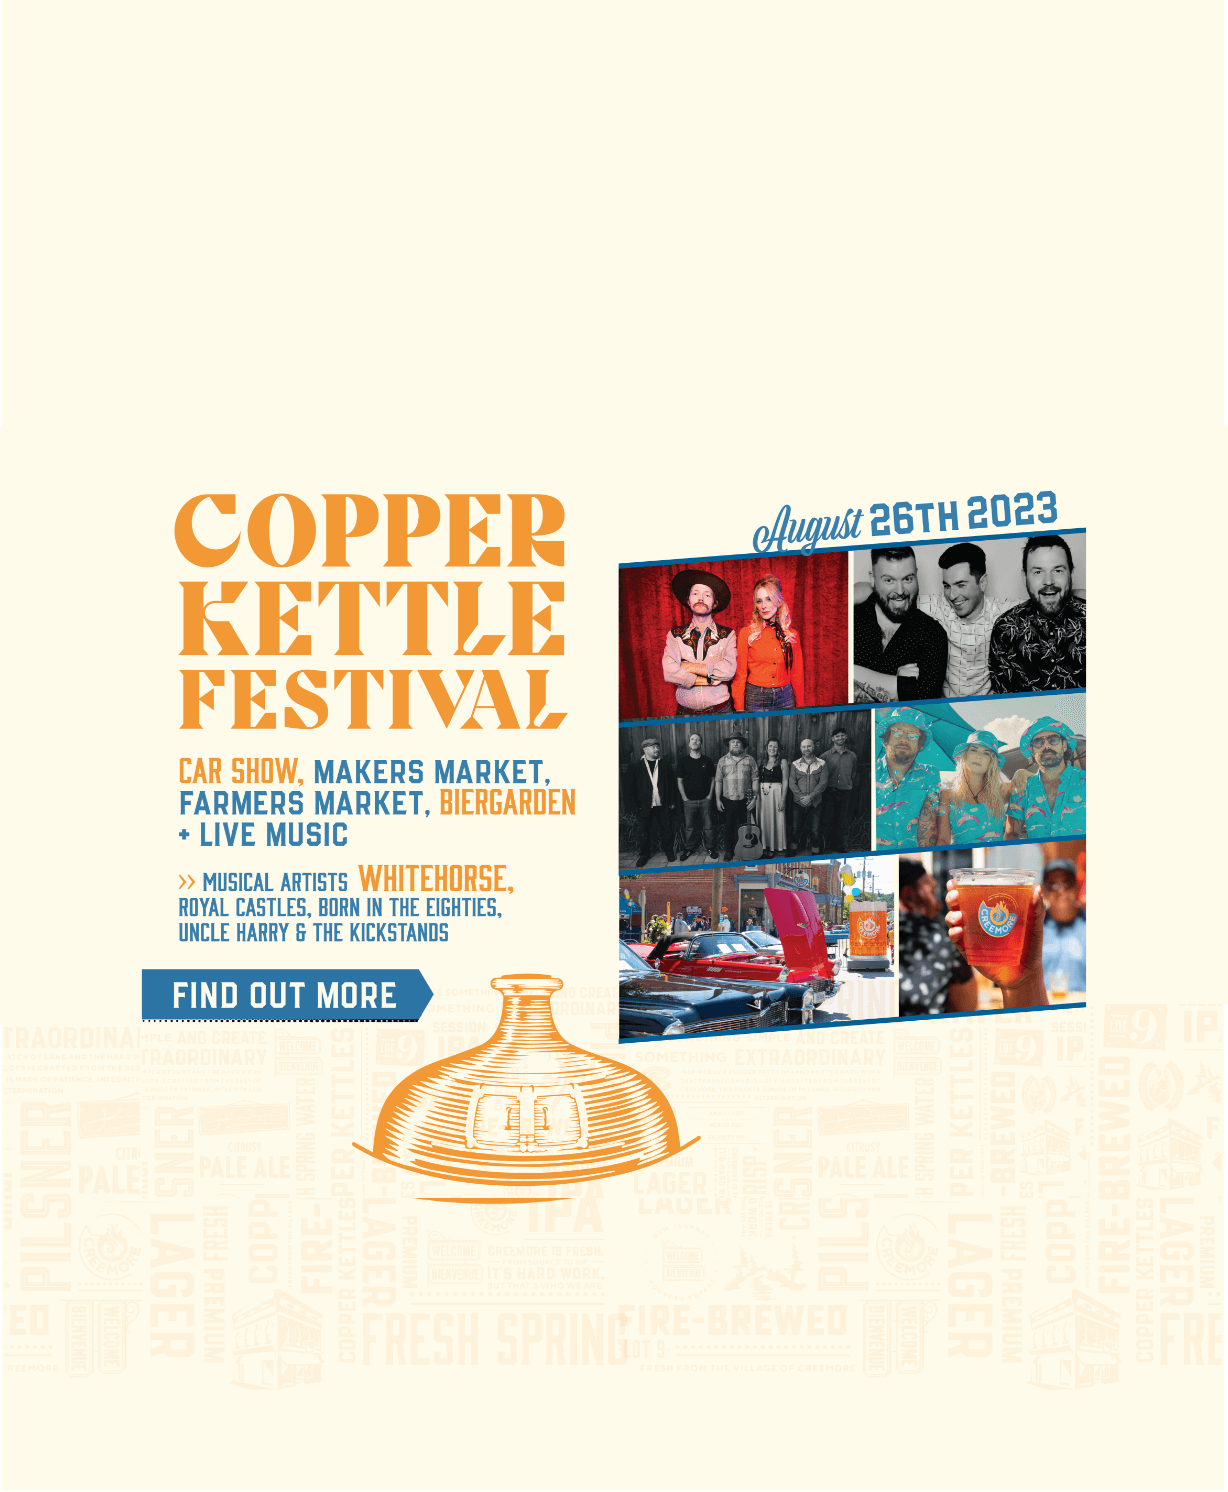 Copper kettle festival with photo music groups invitation